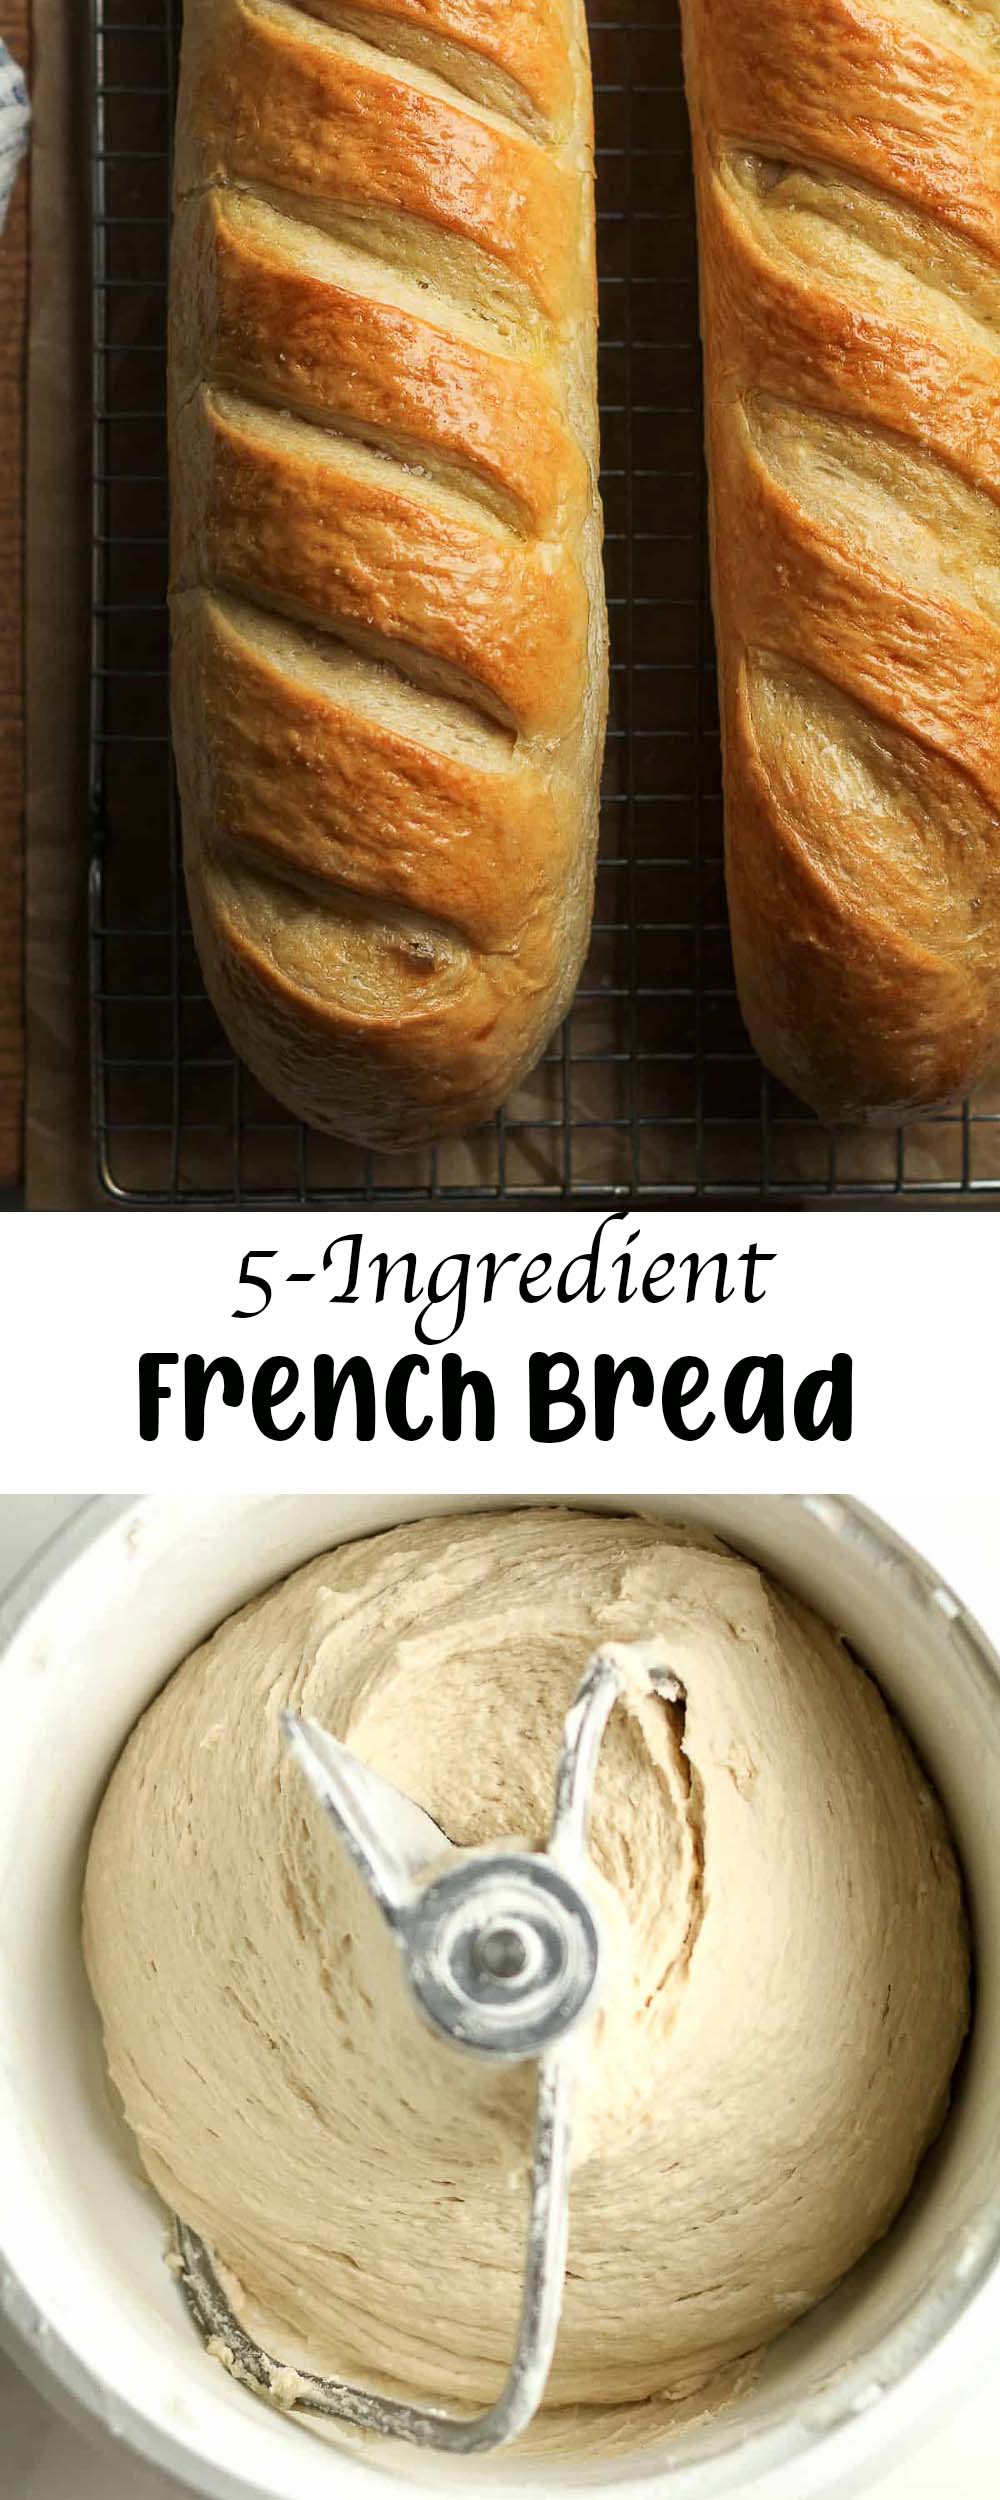 A collage of 5-Ingredient French Bread - one in the mixer and one of the baked loaves.